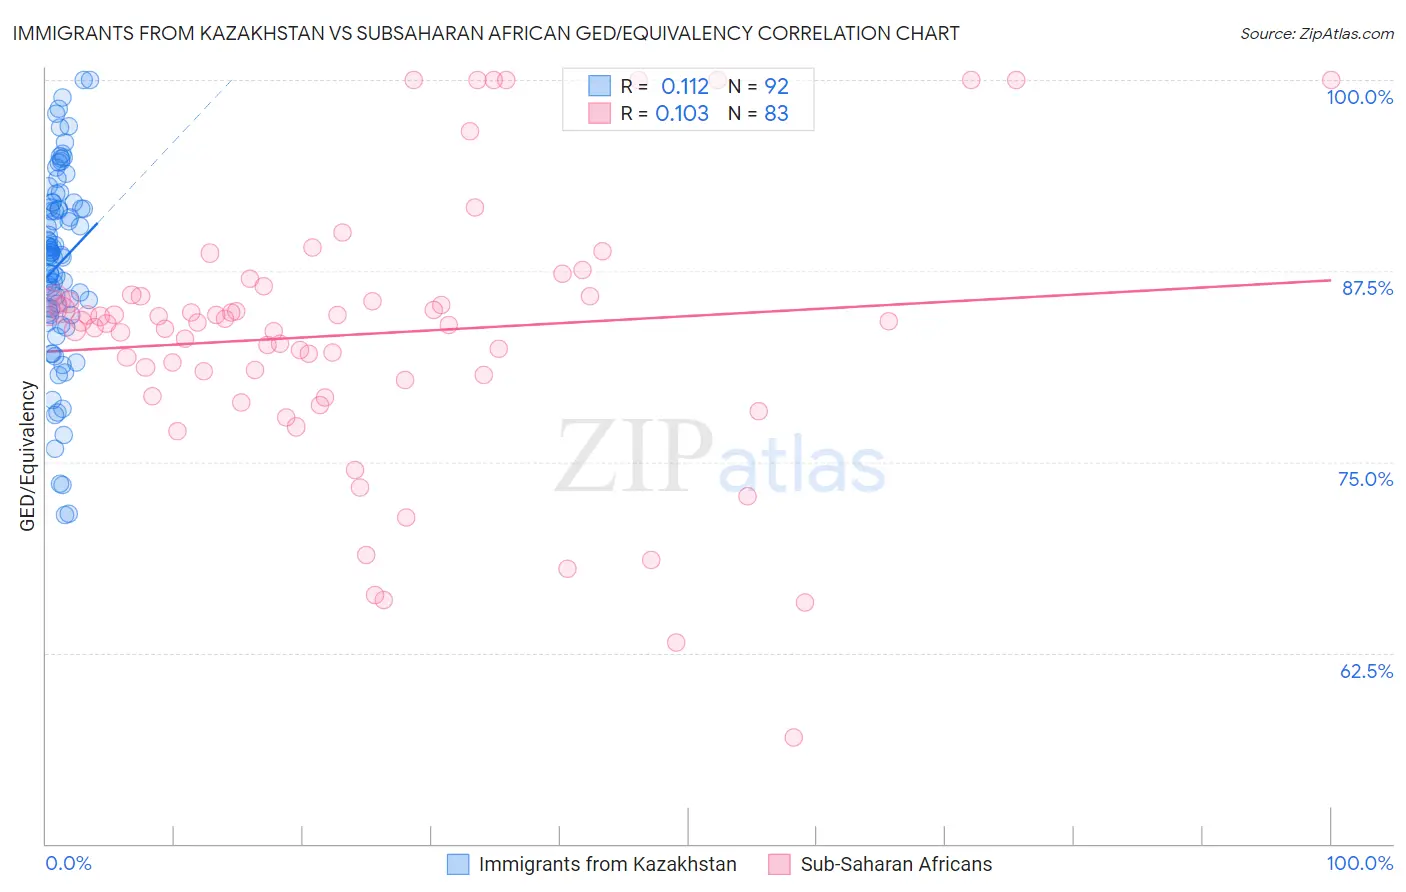 Immigrants from Kazakhstan vs Subsaharan African GED/Equivalency